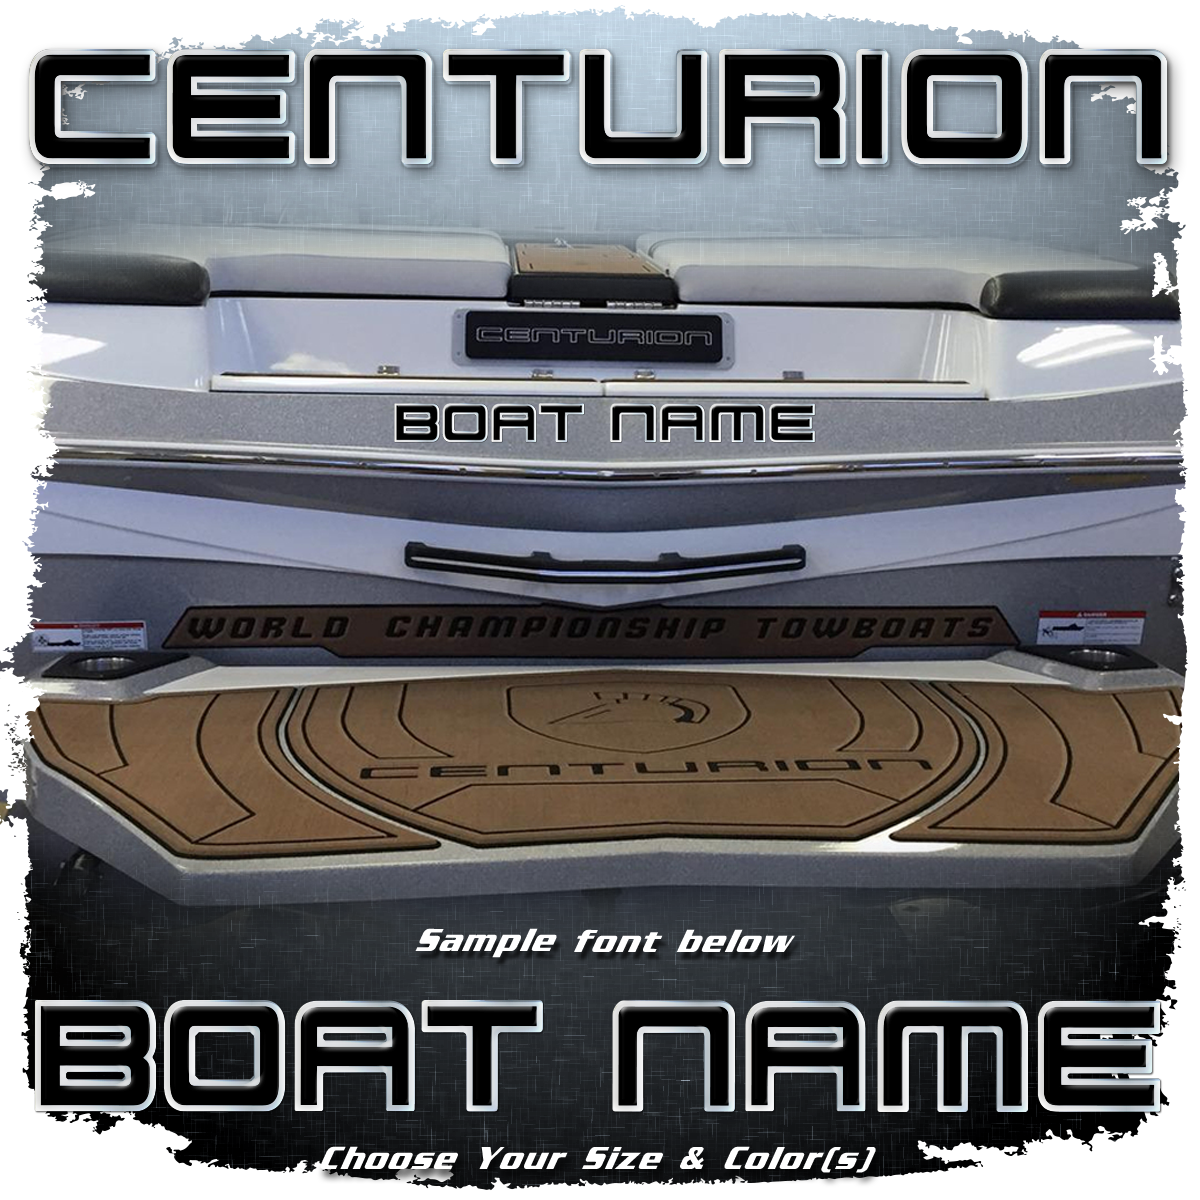 Domed Boat Name in the Centurion Font, Choose Your Own Colors